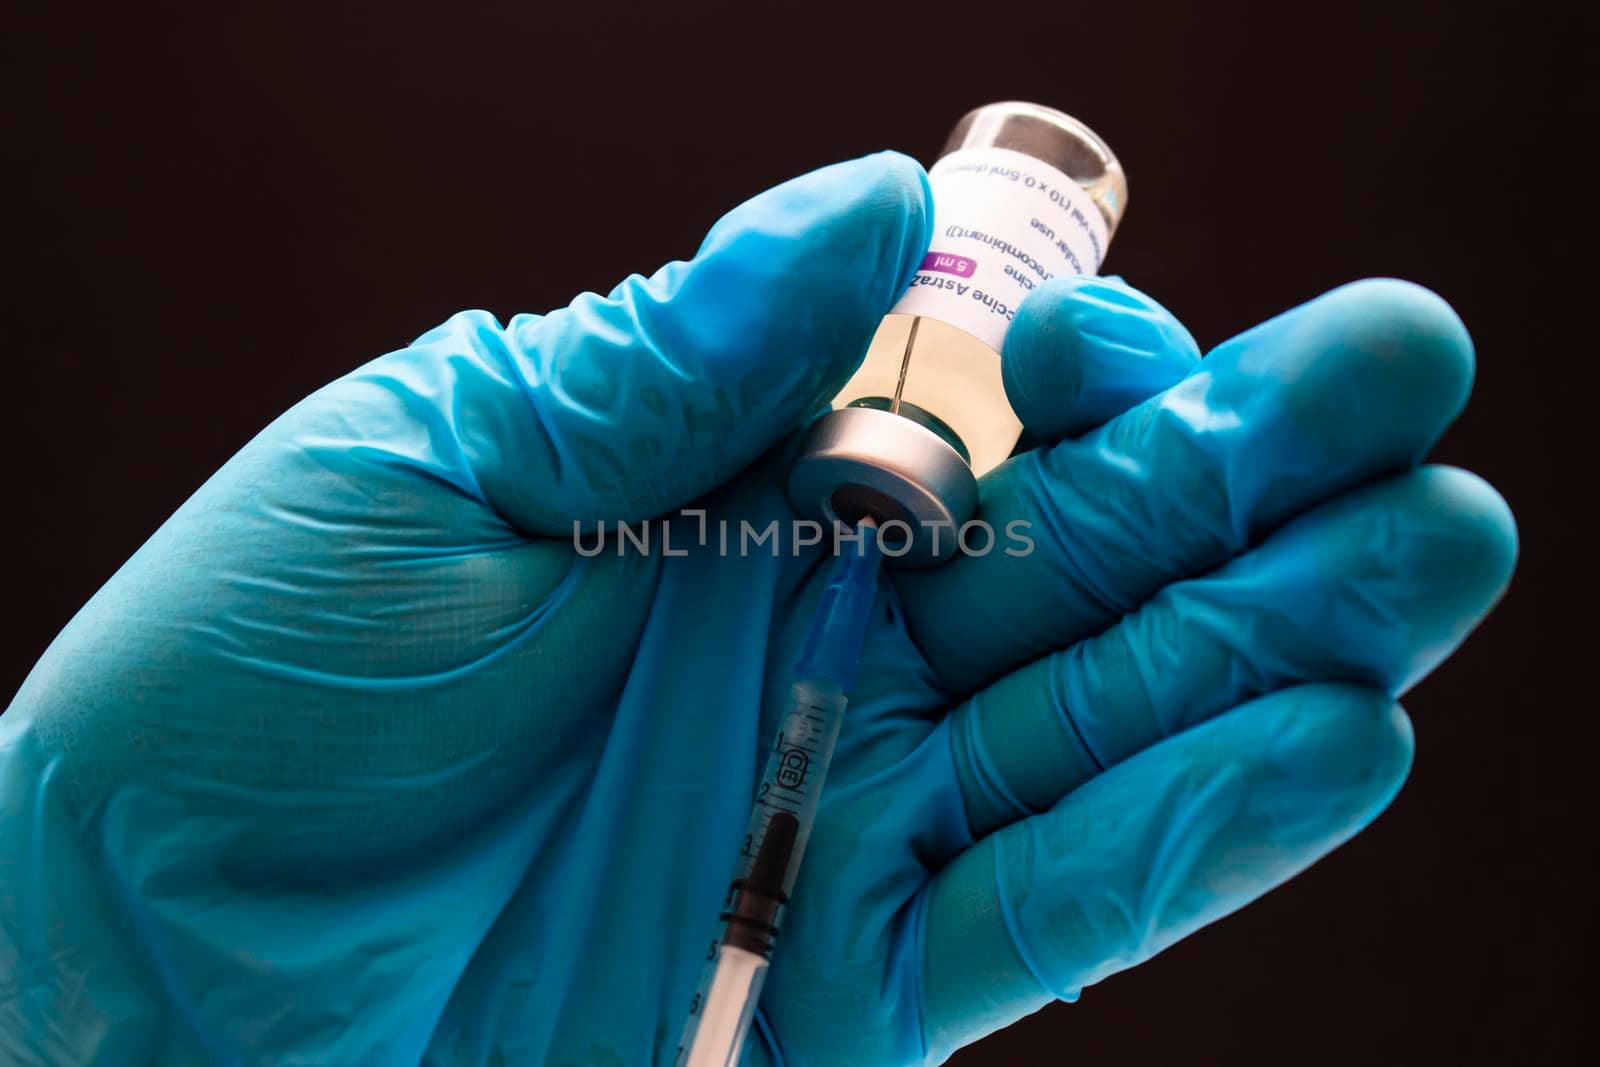 Calgary, Alberta. Canada. April 02, 2021. Health care worker with a AstraZeneca Vaccine and injection syringe.